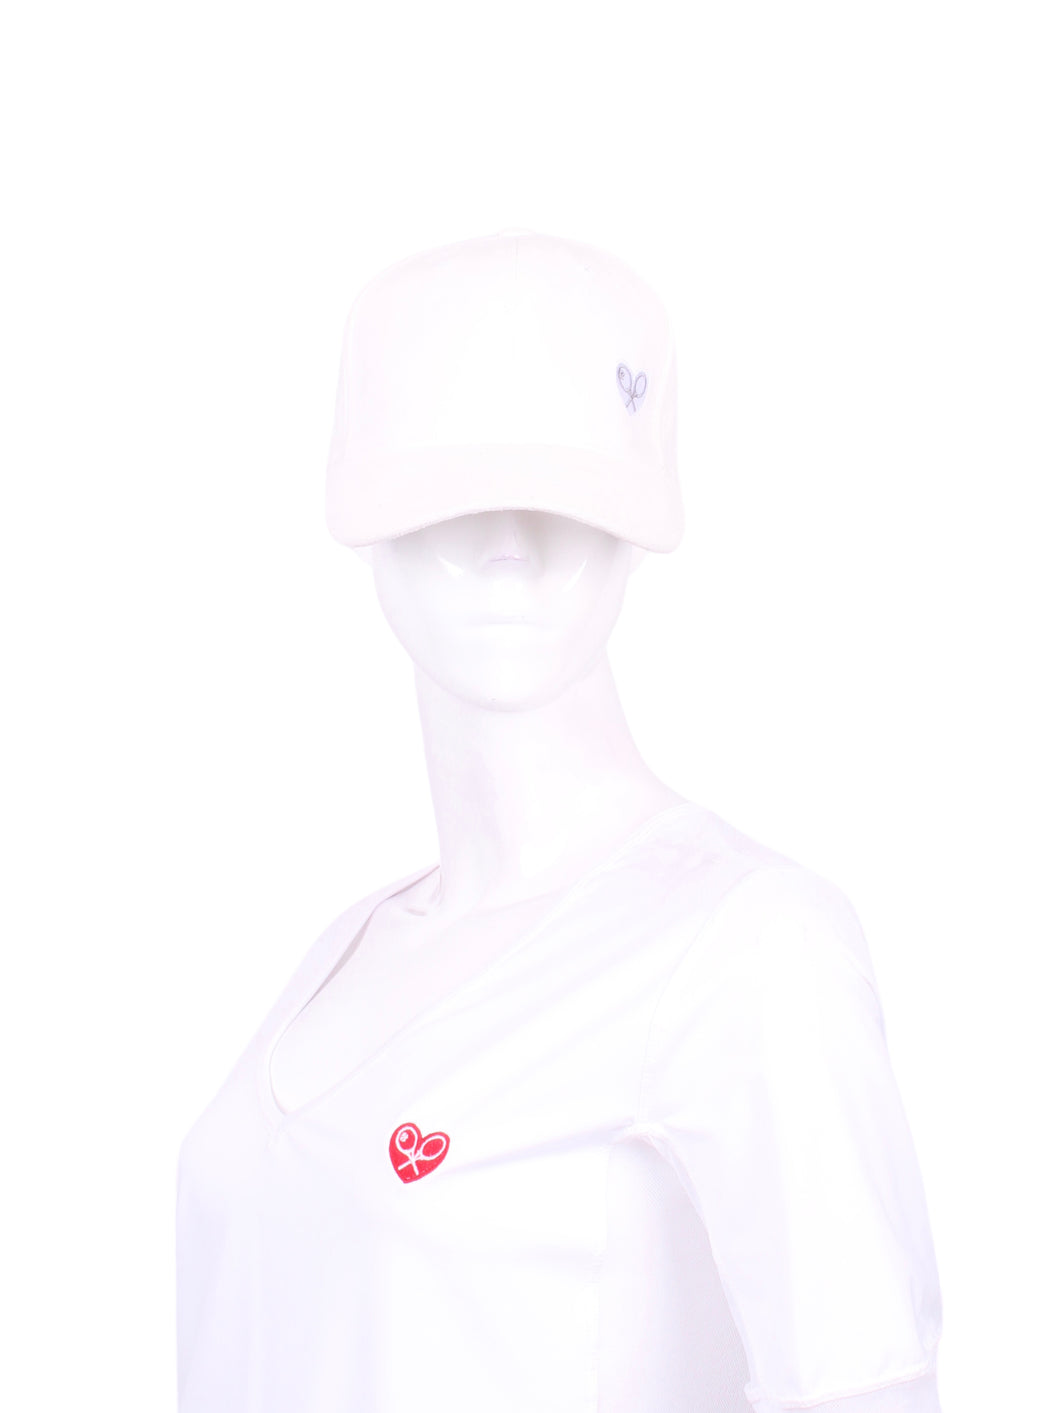 The luxurious White Faux Suede With Silver Heart tennis hat is the epitome of elegance and style on the tennis court. Crafted with the utmost attention to detail, this hat combines comfort, functionality, and a touch of opulence.